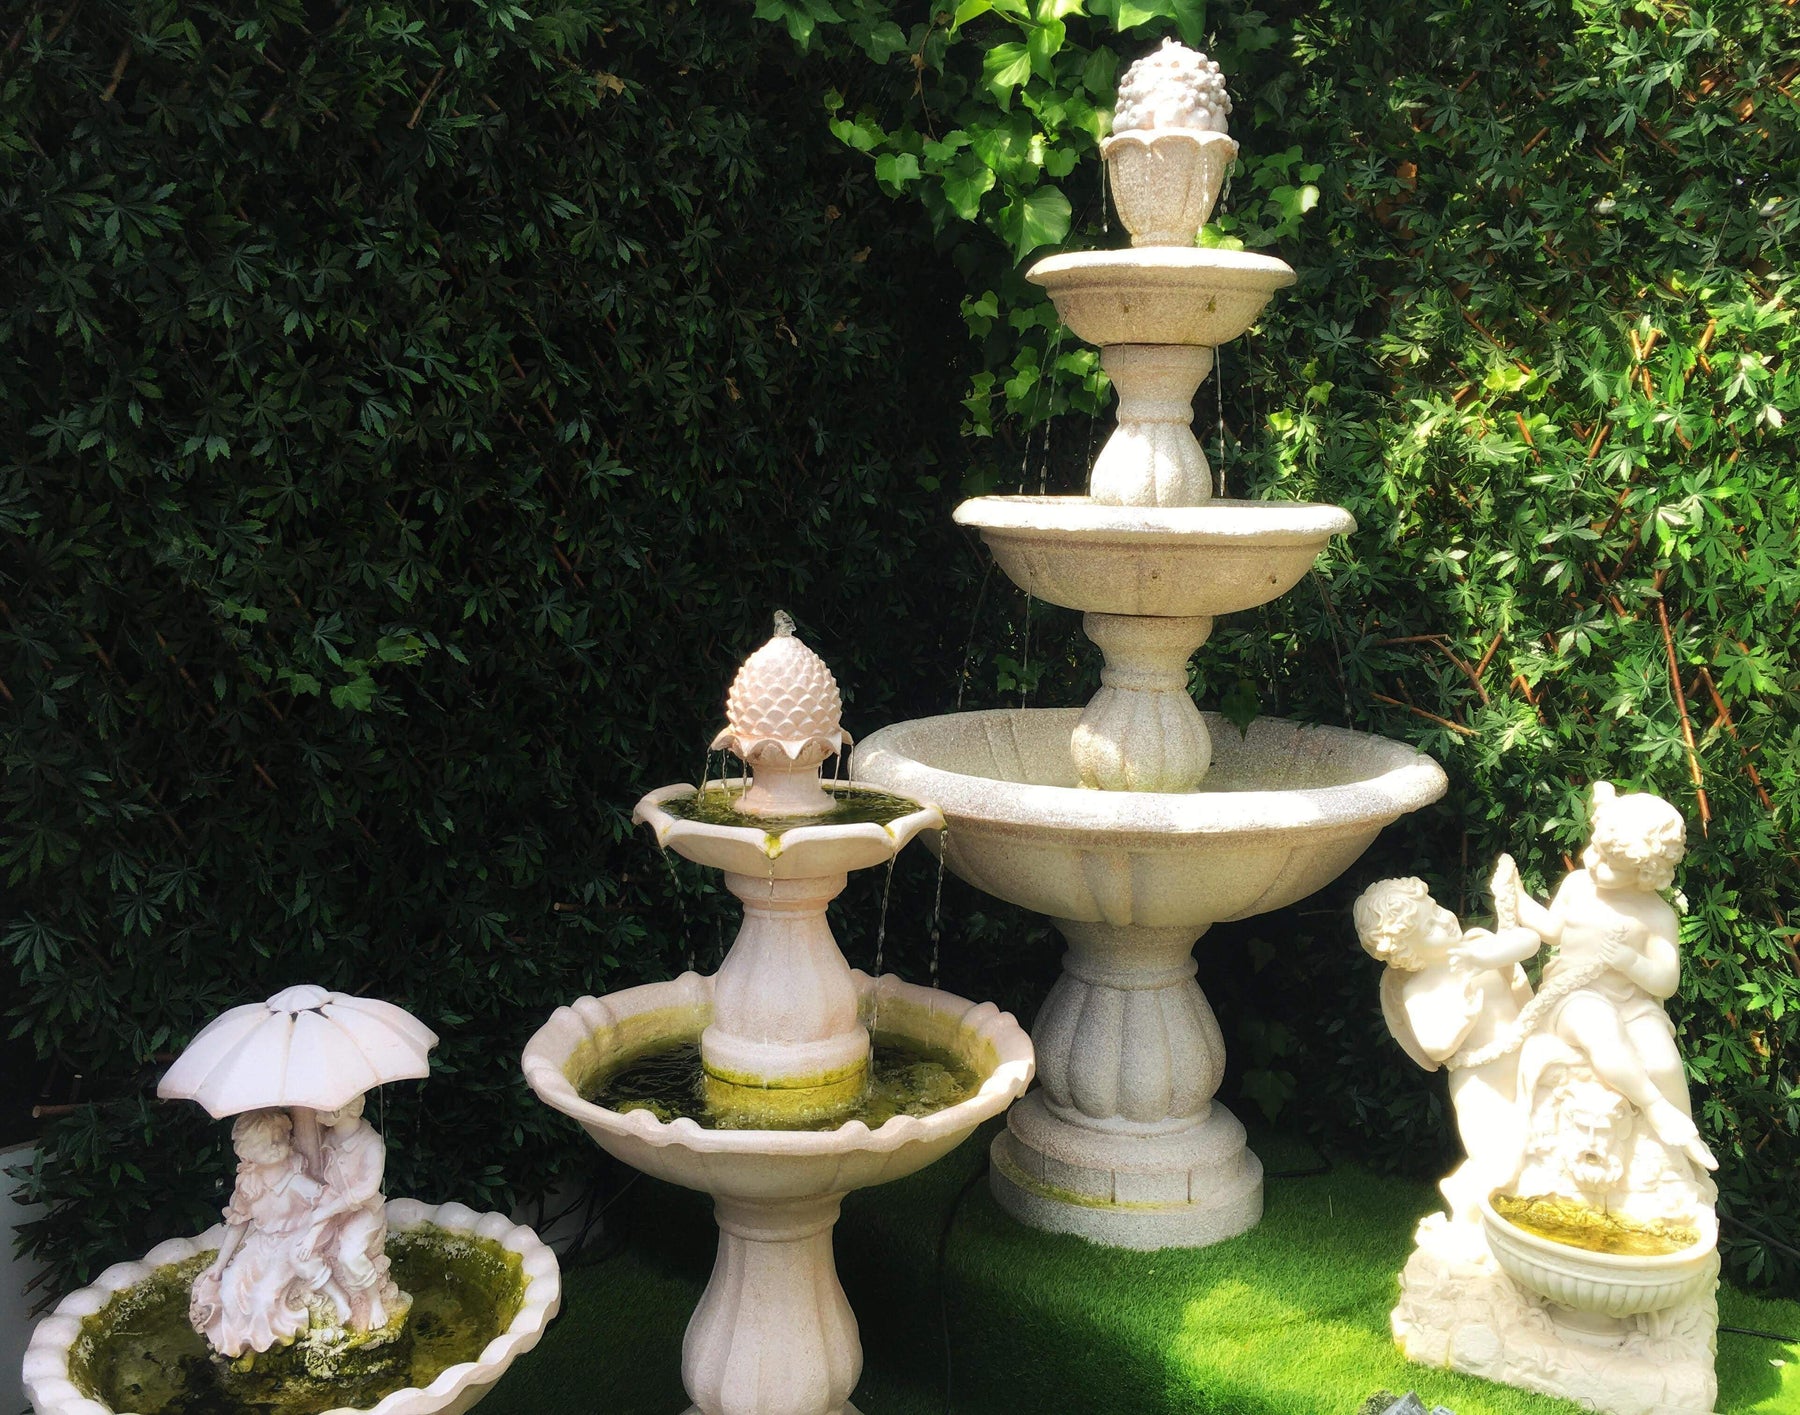 Maintenance tips for garden fountains and water features